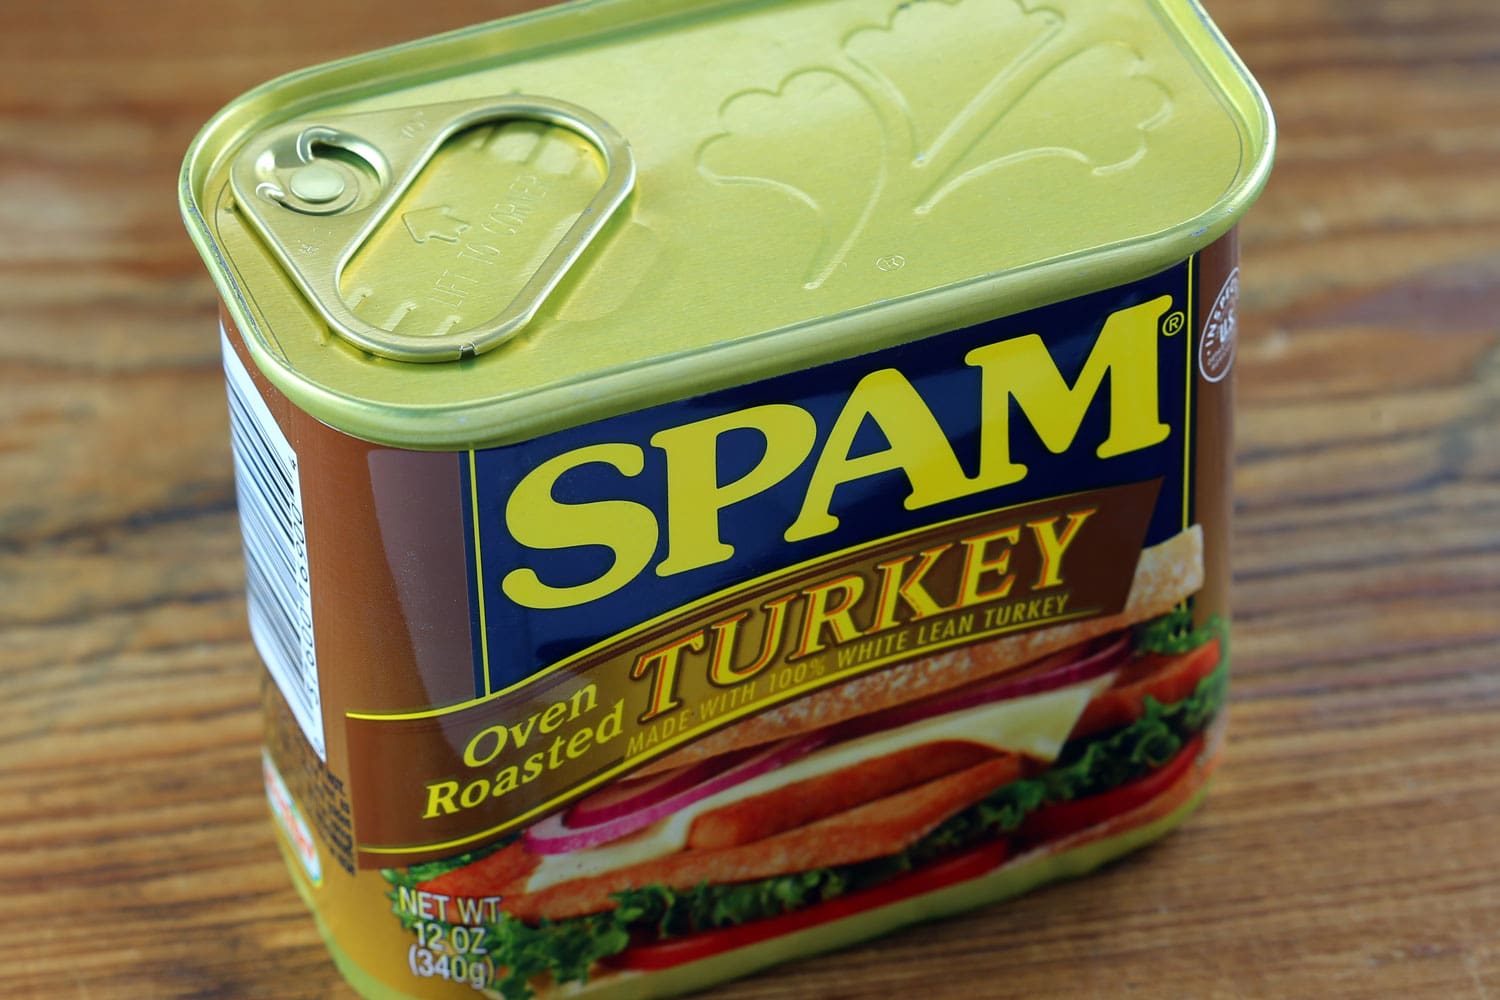 Hormel Foods, LLC the producer of SPAM, now has added Oven Roasted Turkey to their line up of canned meat products.